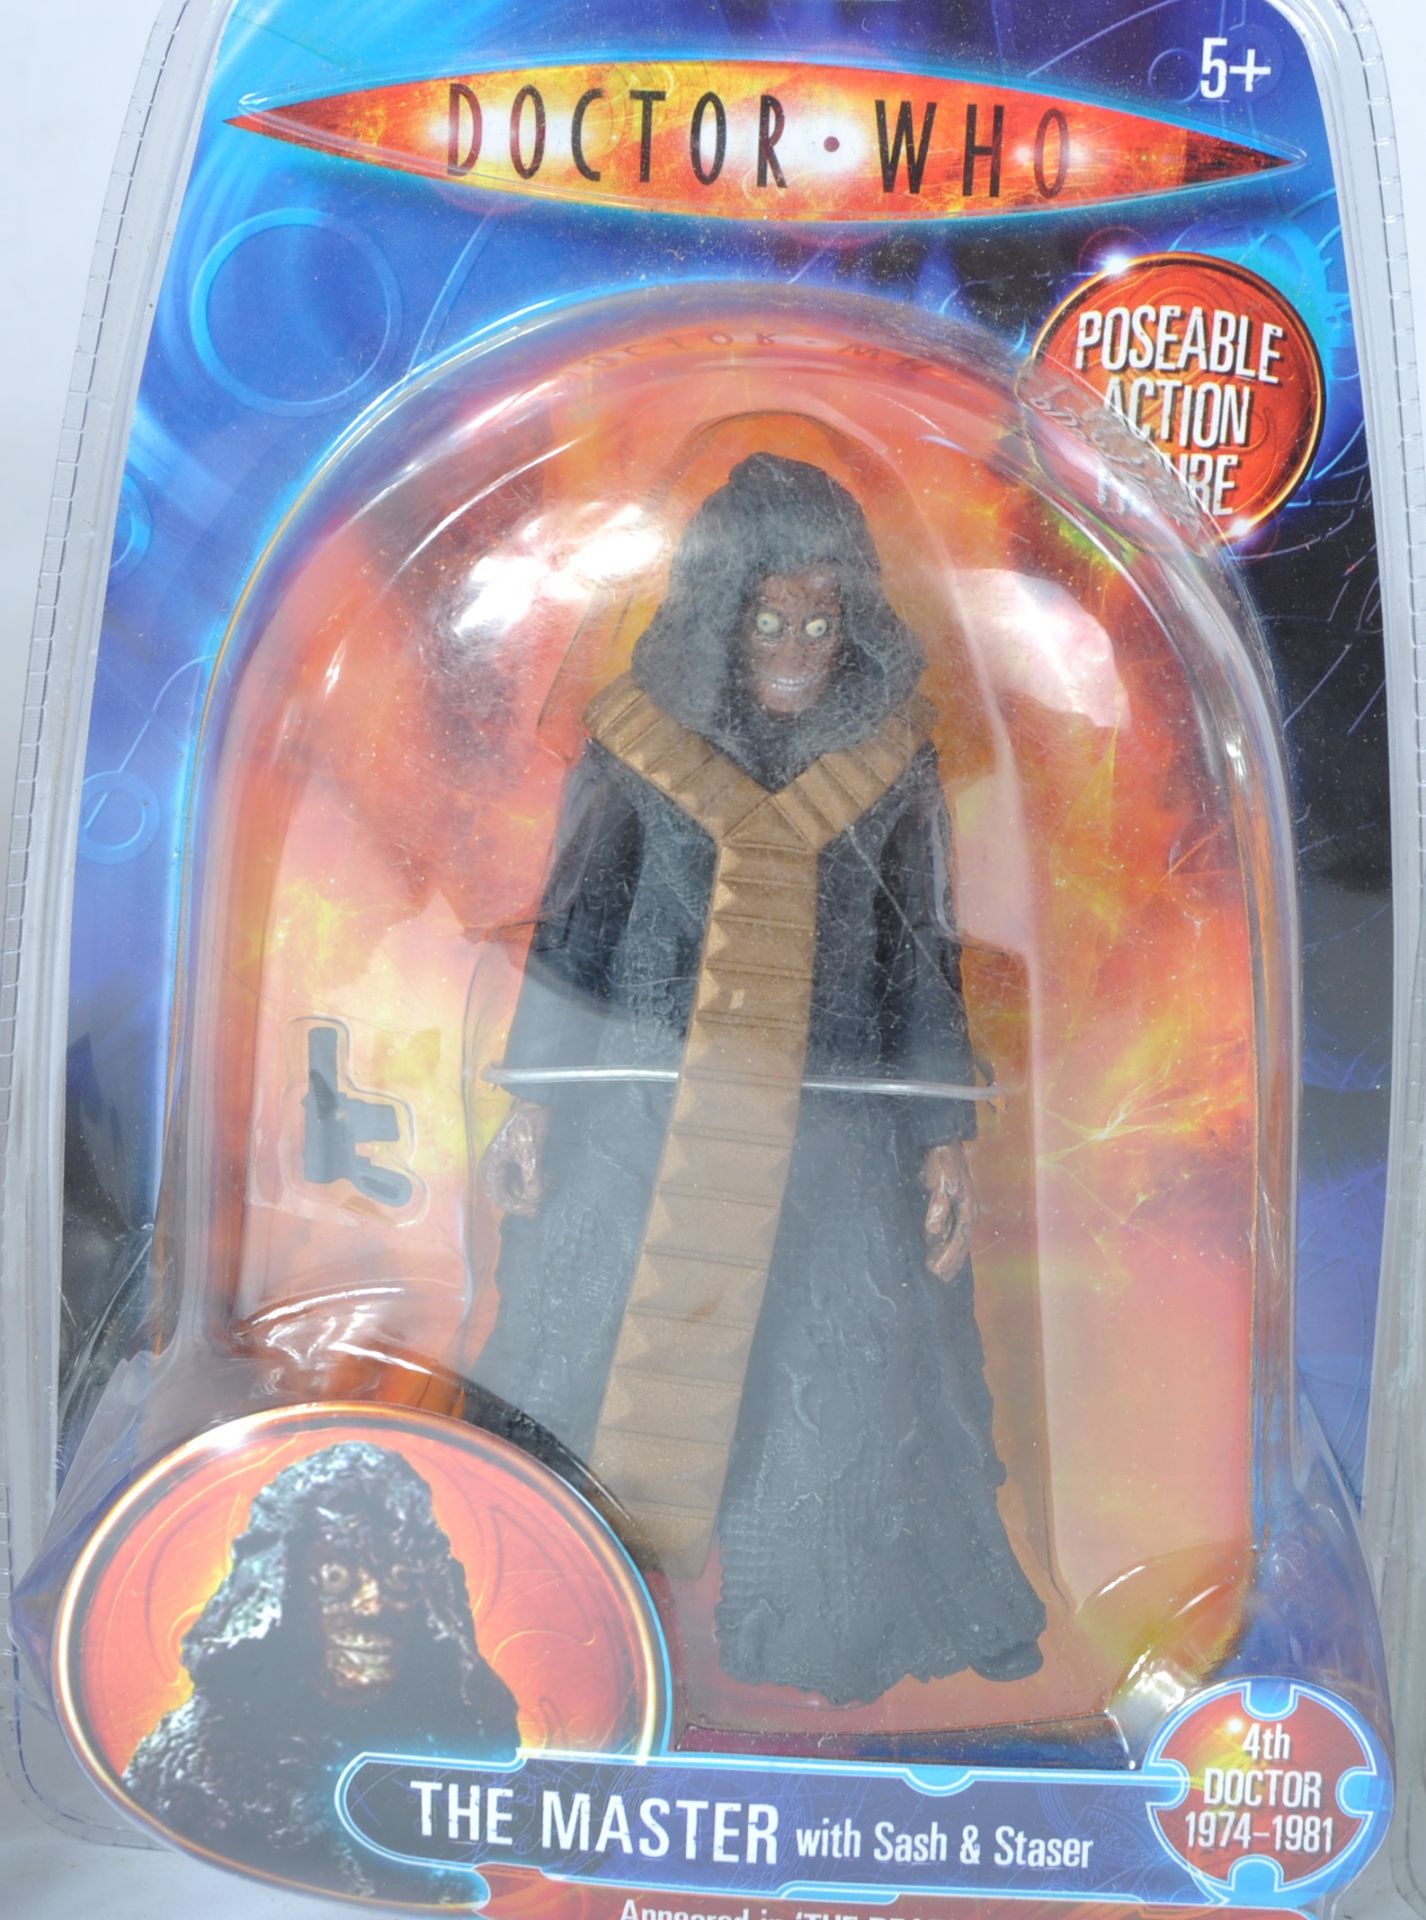 DOCTOR WHO - CHARACTER OPTIONS - 4TH DOCTOR RELATED ACTION FIGURES - Image 3 of 5